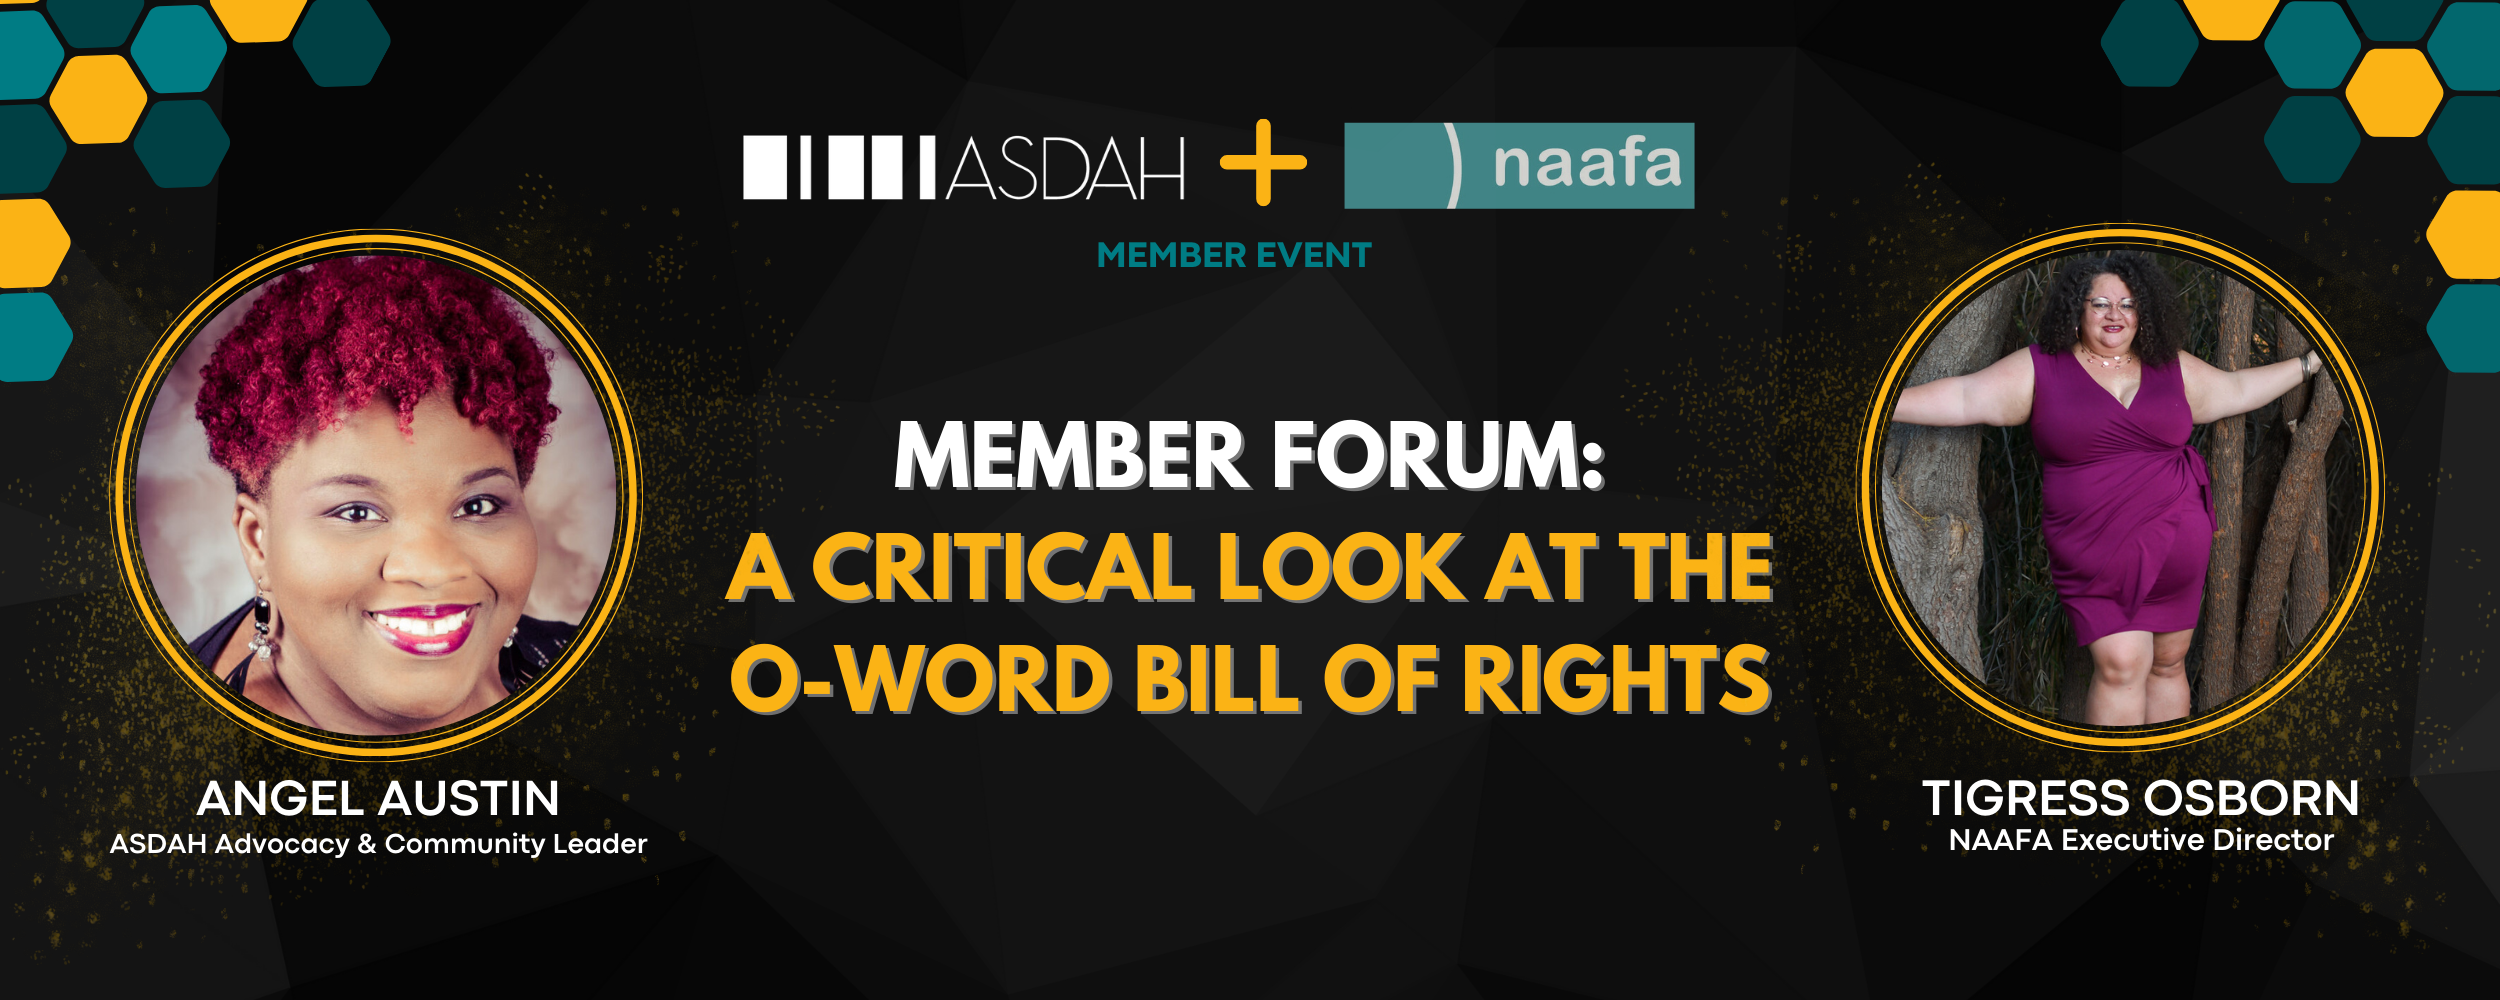 Event flier with ASDAH & NAAFA logos, images of Angel Austin & Tigress Osborne with text that reads Member Forum: A Critical Look at the O-Word Bill of Rights